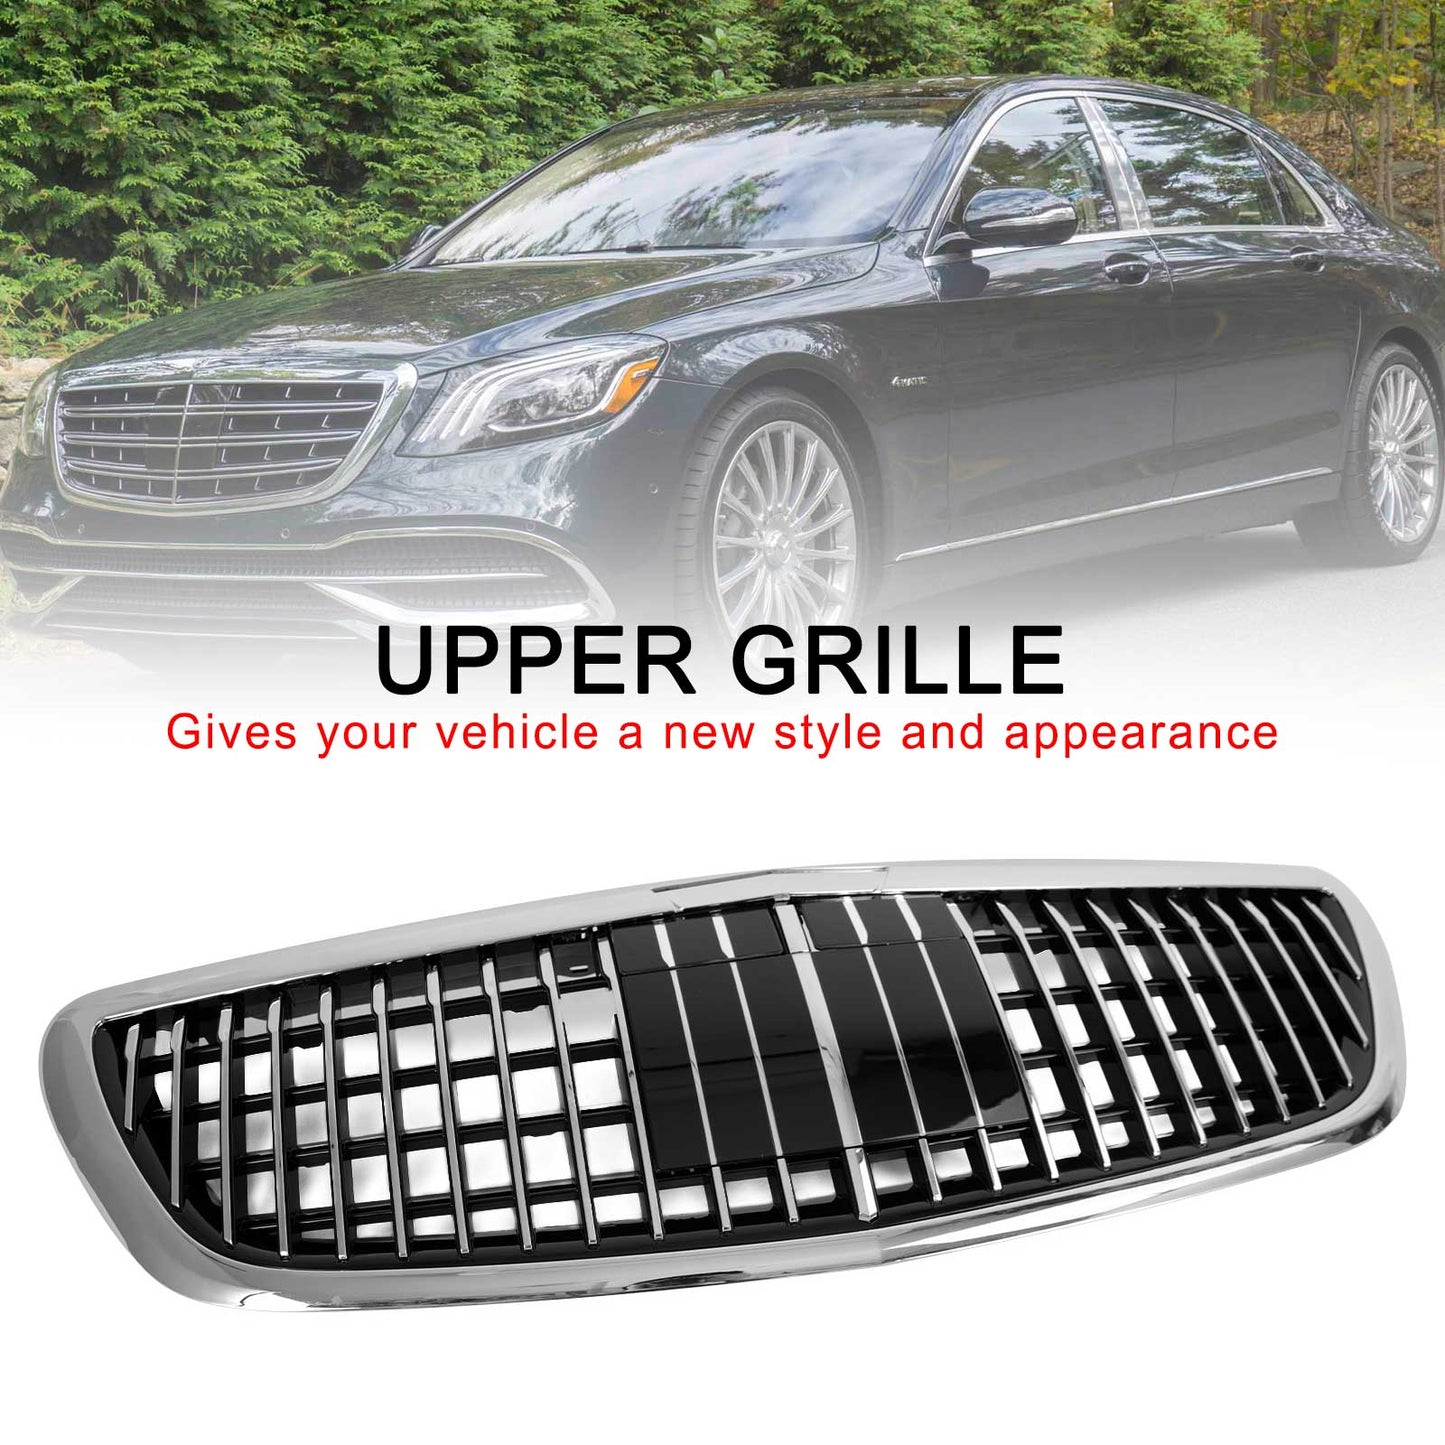 S class W222 2014-2020 S680 Mercedes Benz Maybach Style Car Grille with ACC